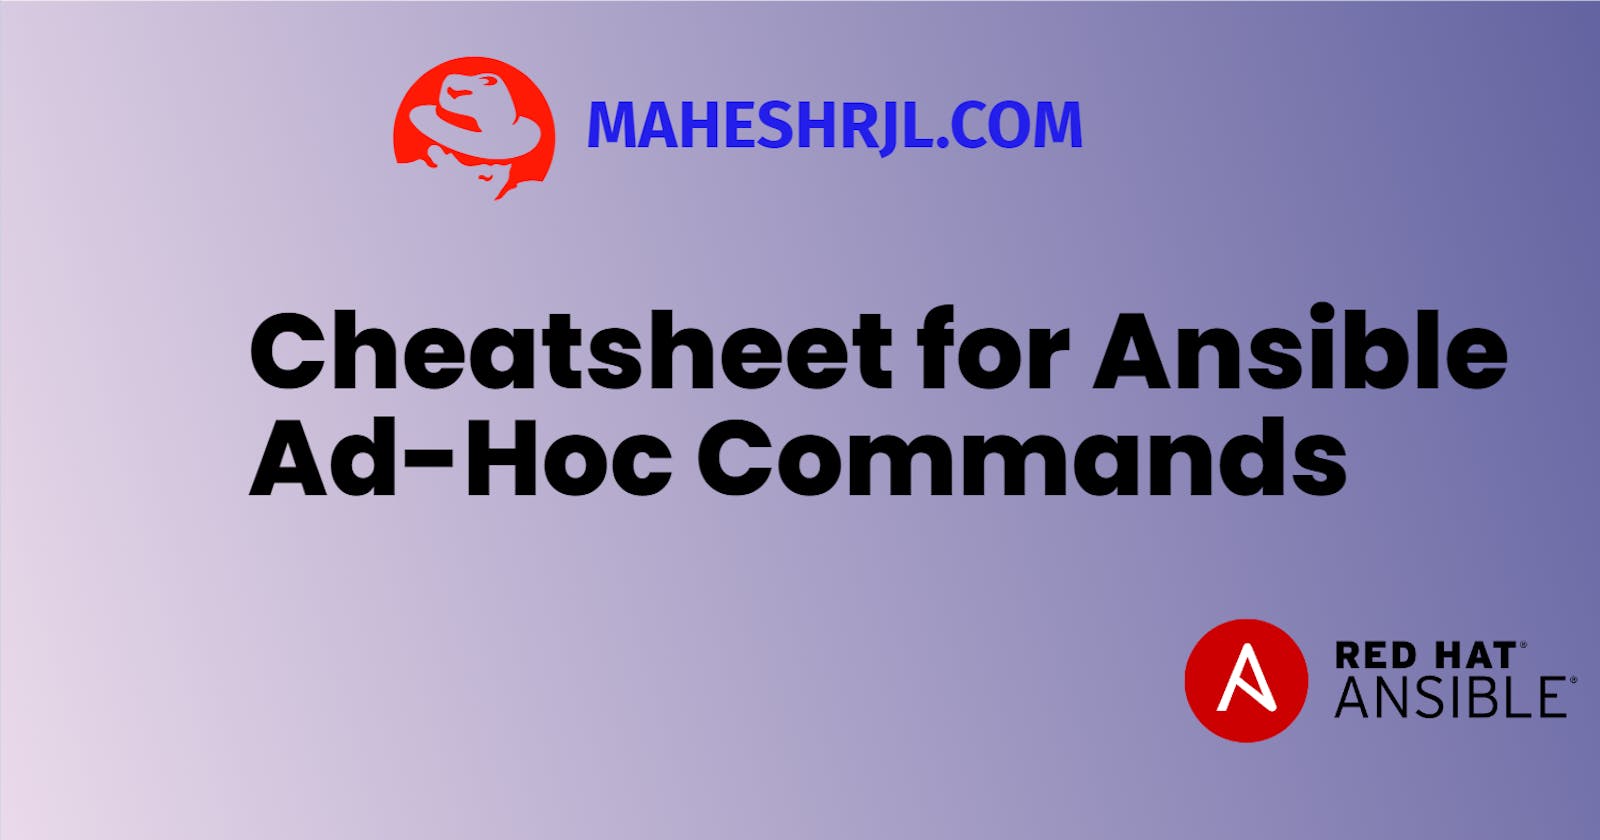 A cheat sheet for Ansible Ad-Hoc commands